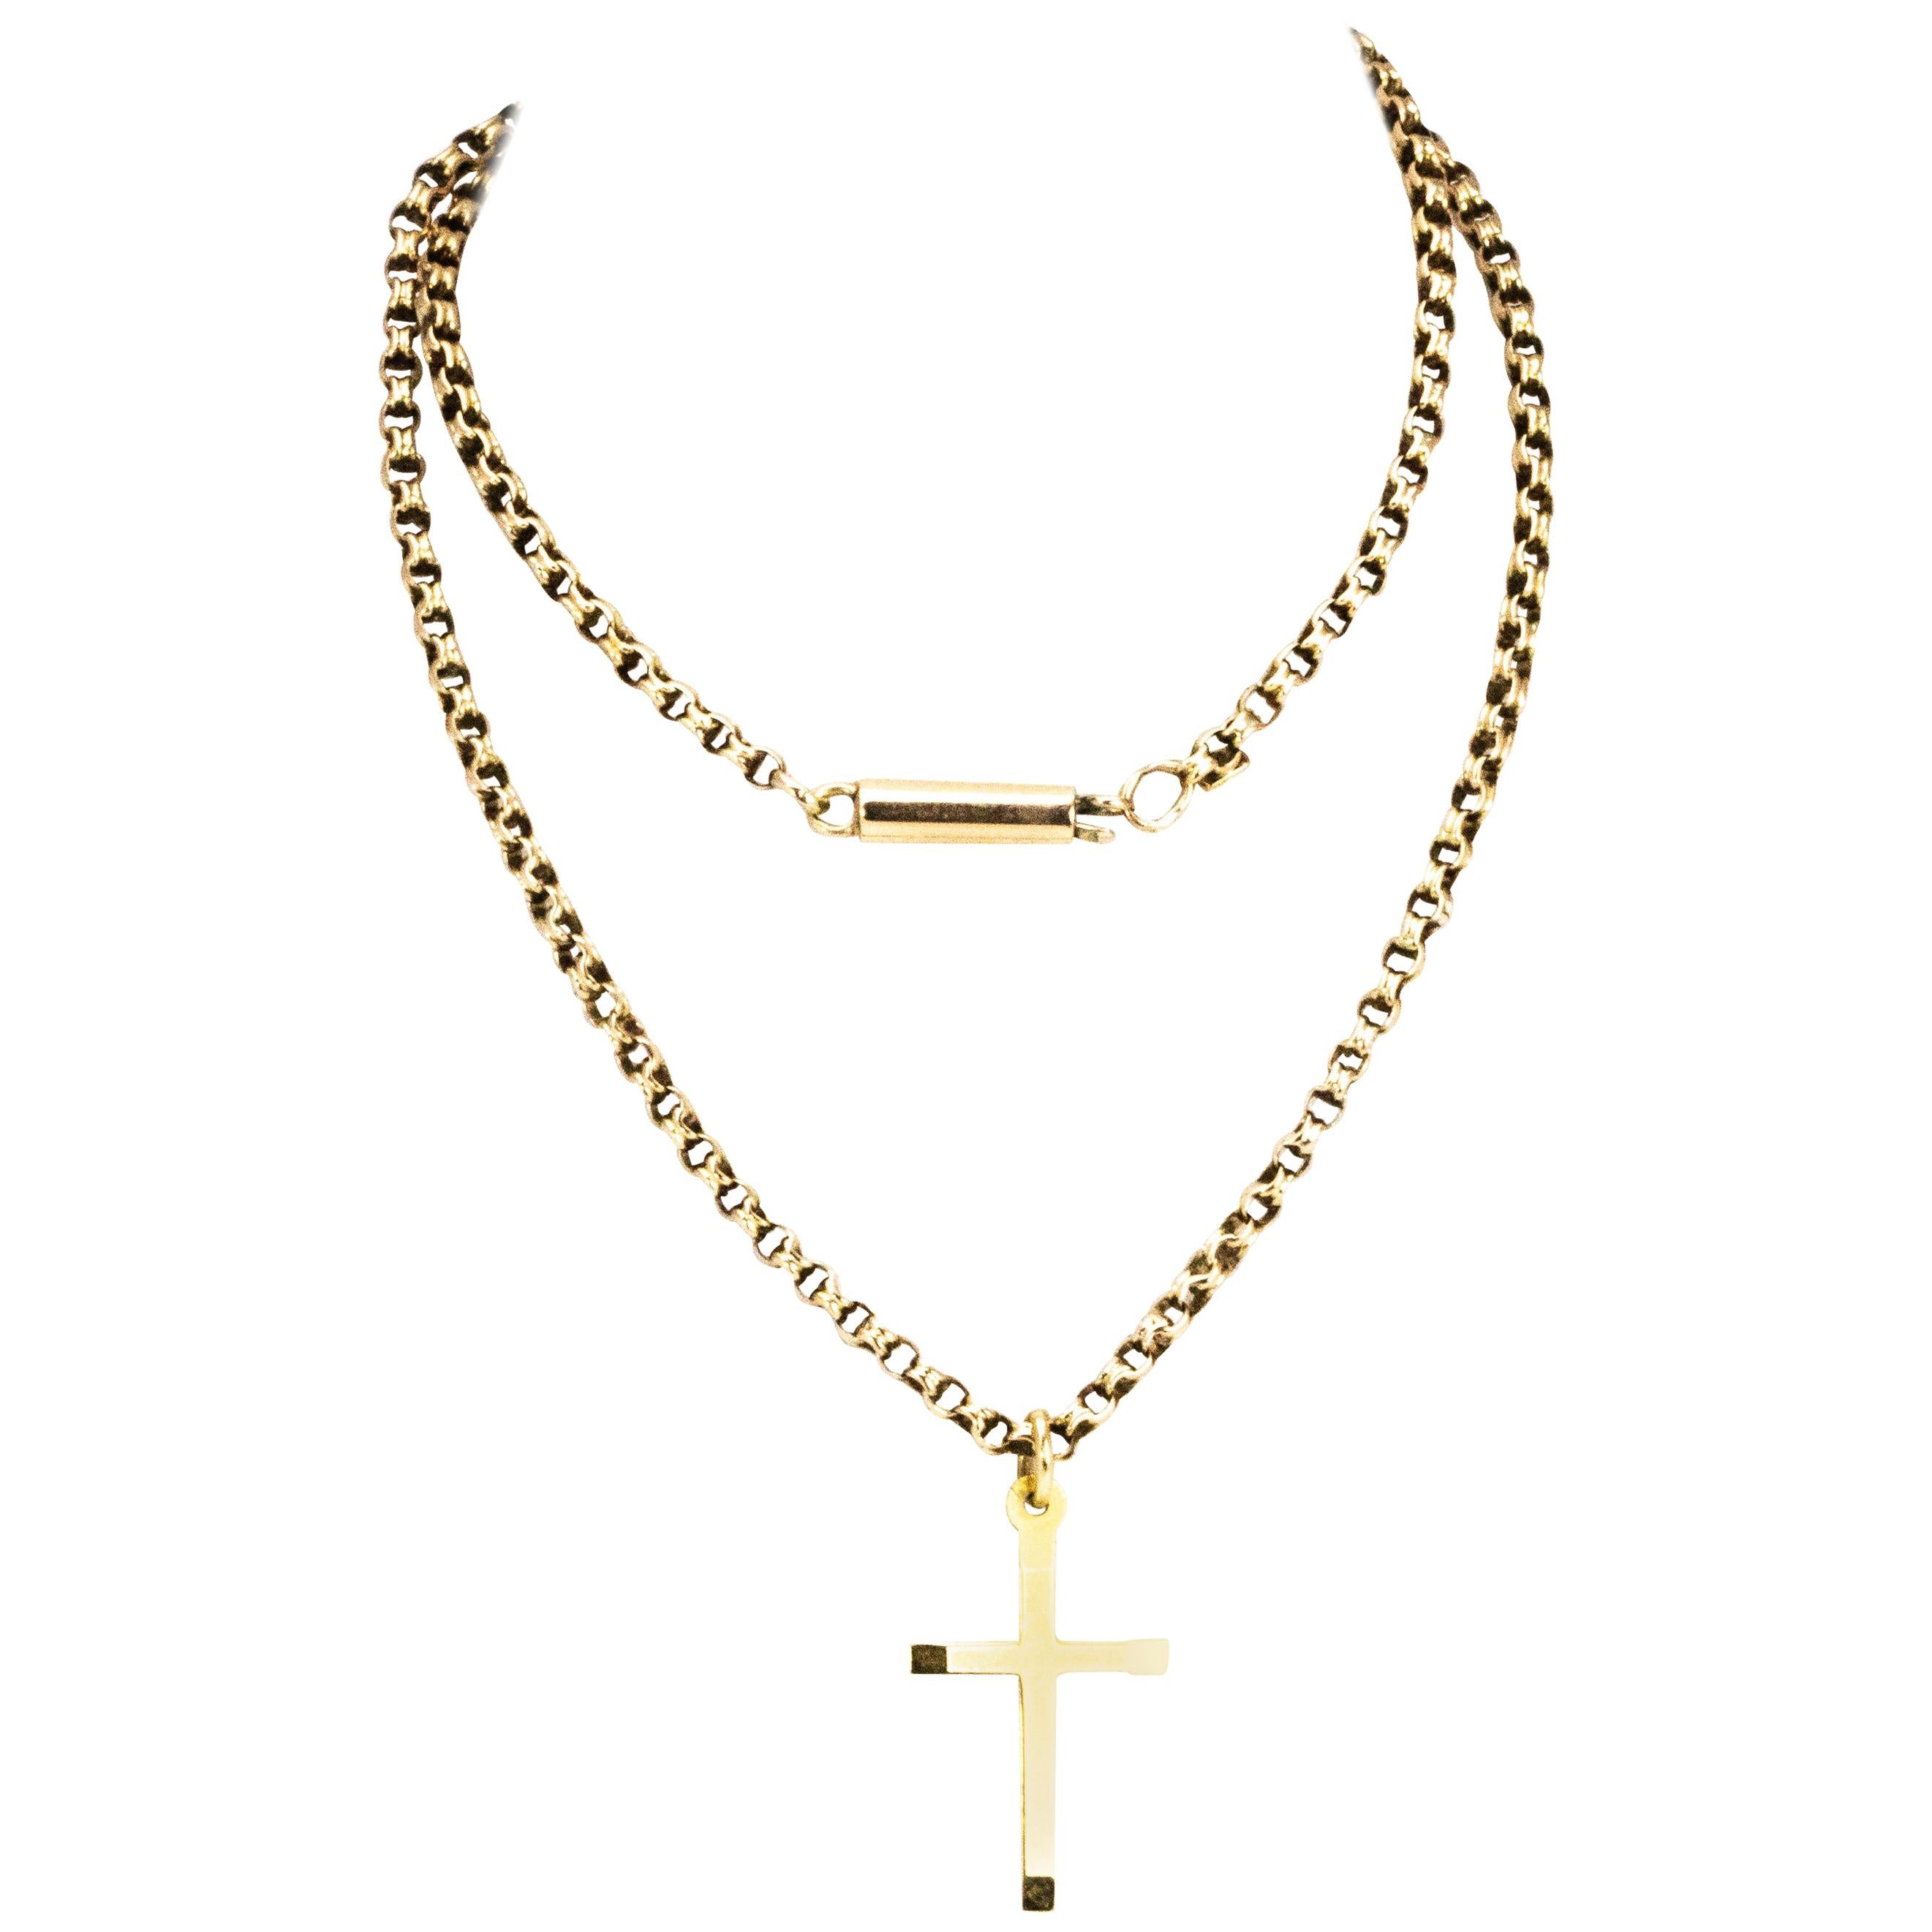 Edwardian 9 Carat Gold Cross and Chain Necklace